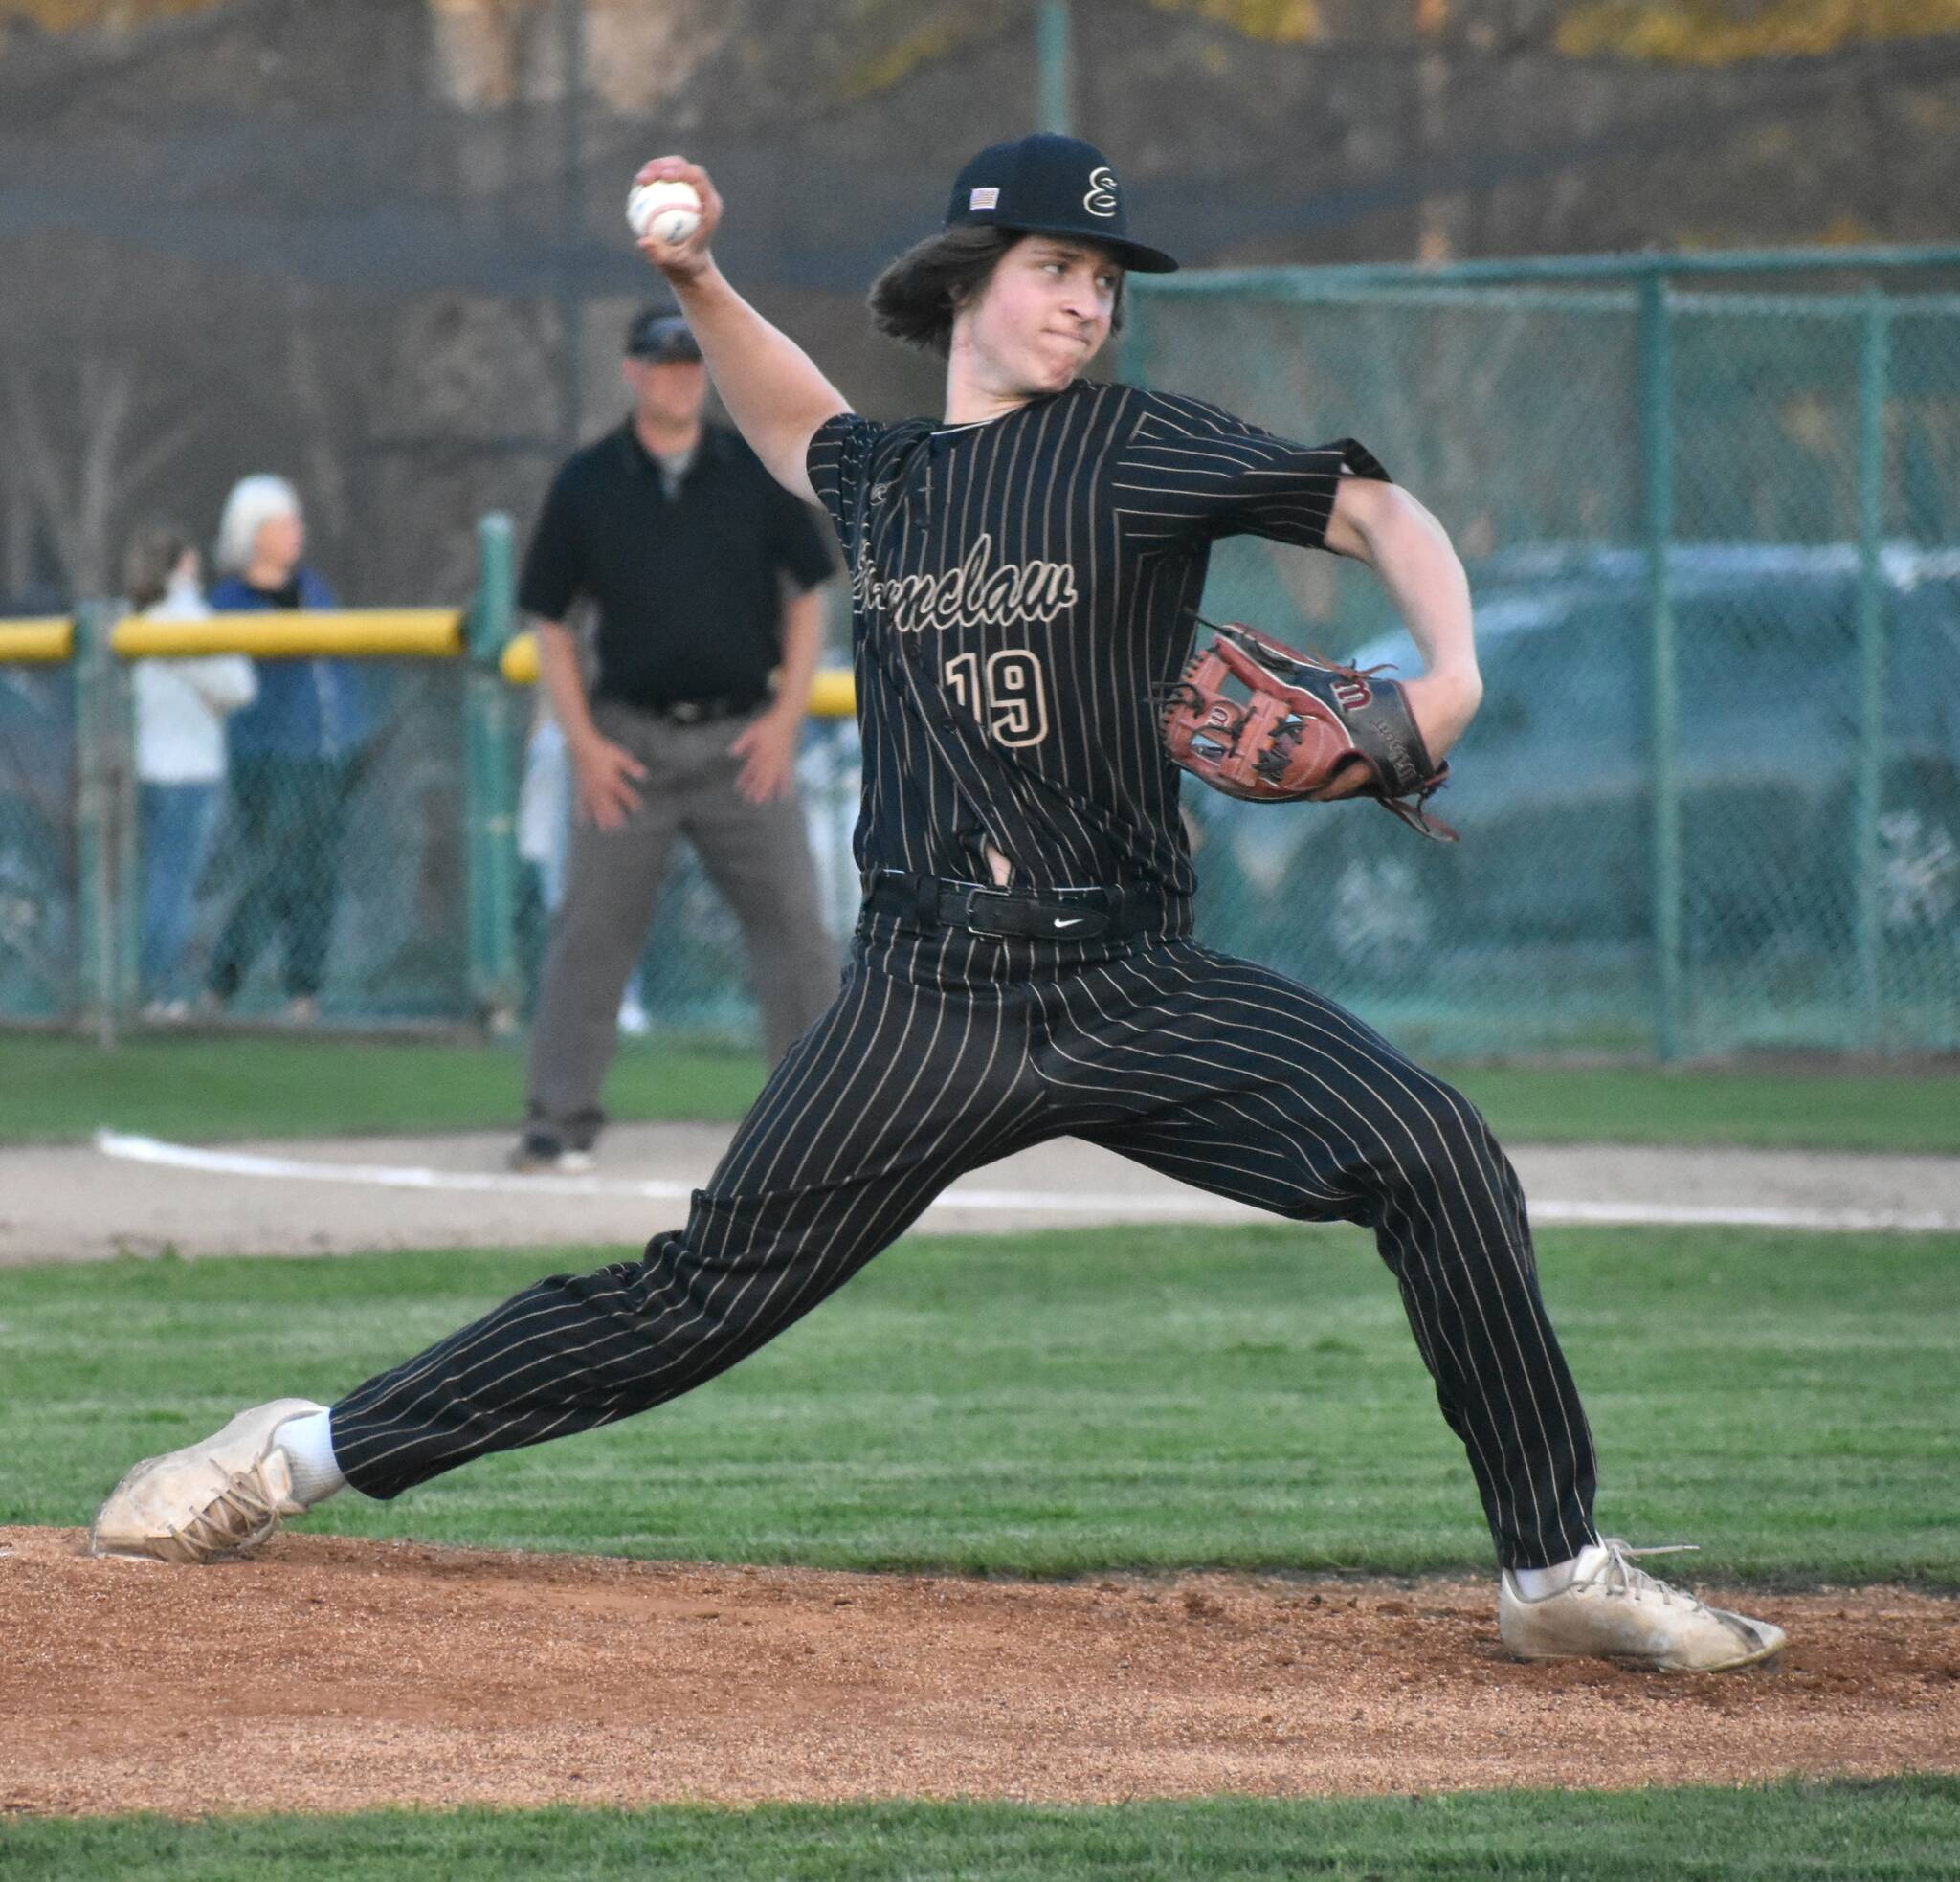 PHOTO BY KEVIN HANSON 
One of the key performers for Enumclaw High baseball all season has been Cooper Markham, a threat every time he takes the mound or steps to the plate. The Hornet sophomore and his teammates will begin the 16-team Class 2A state tournament Saturday morning.